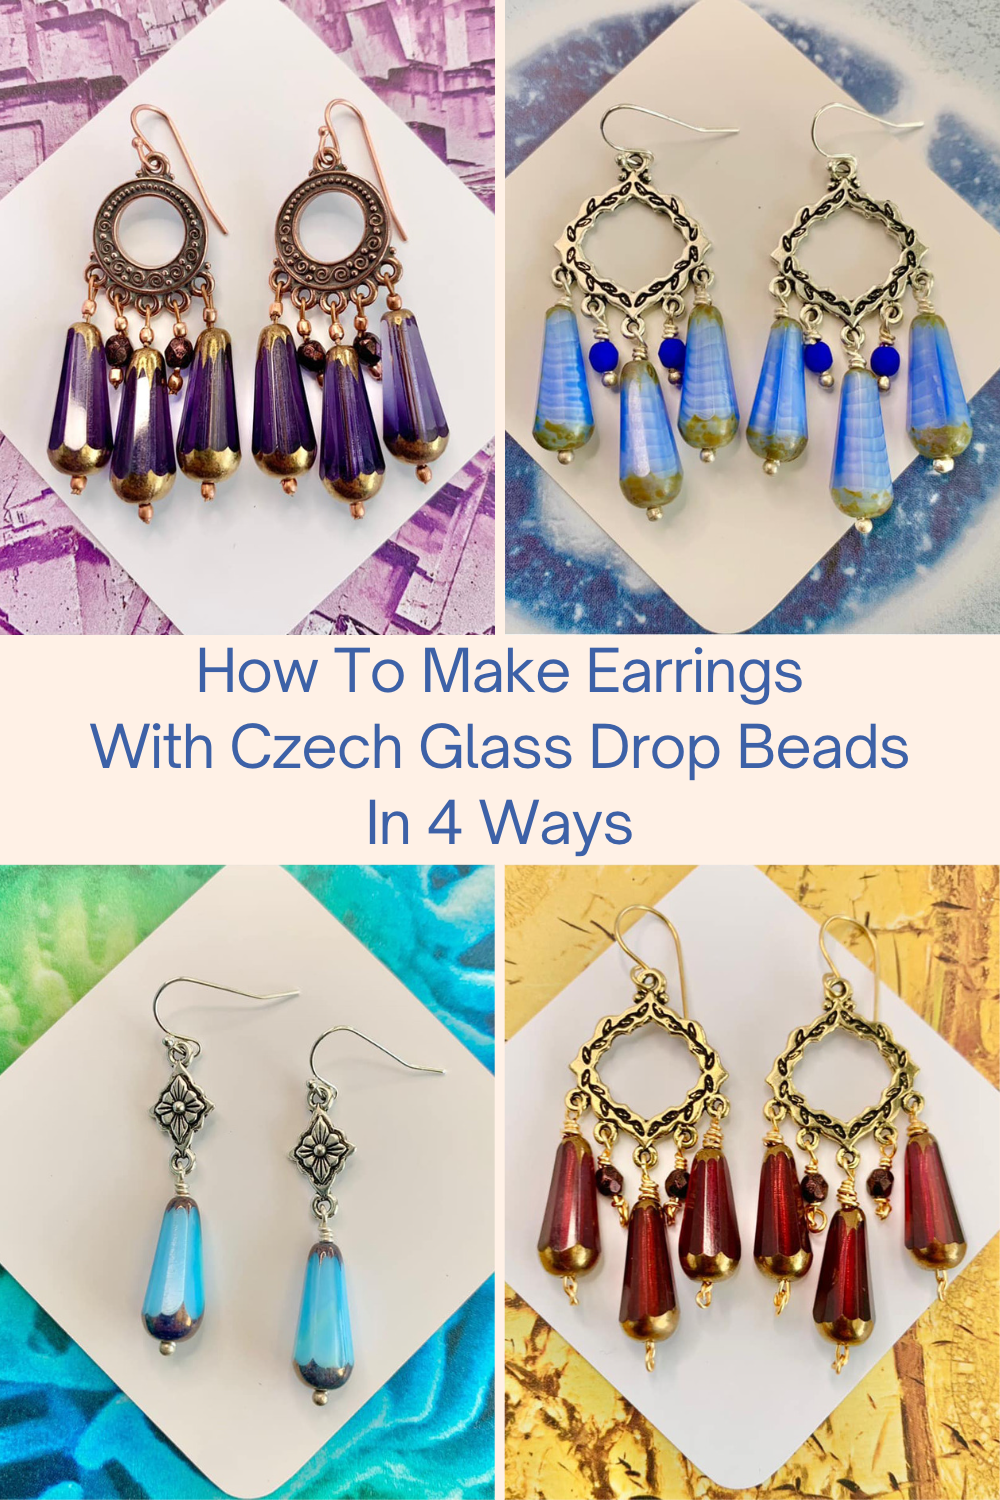 How To Make Earrings With Czech Glass Drop Beads In 4 Ways